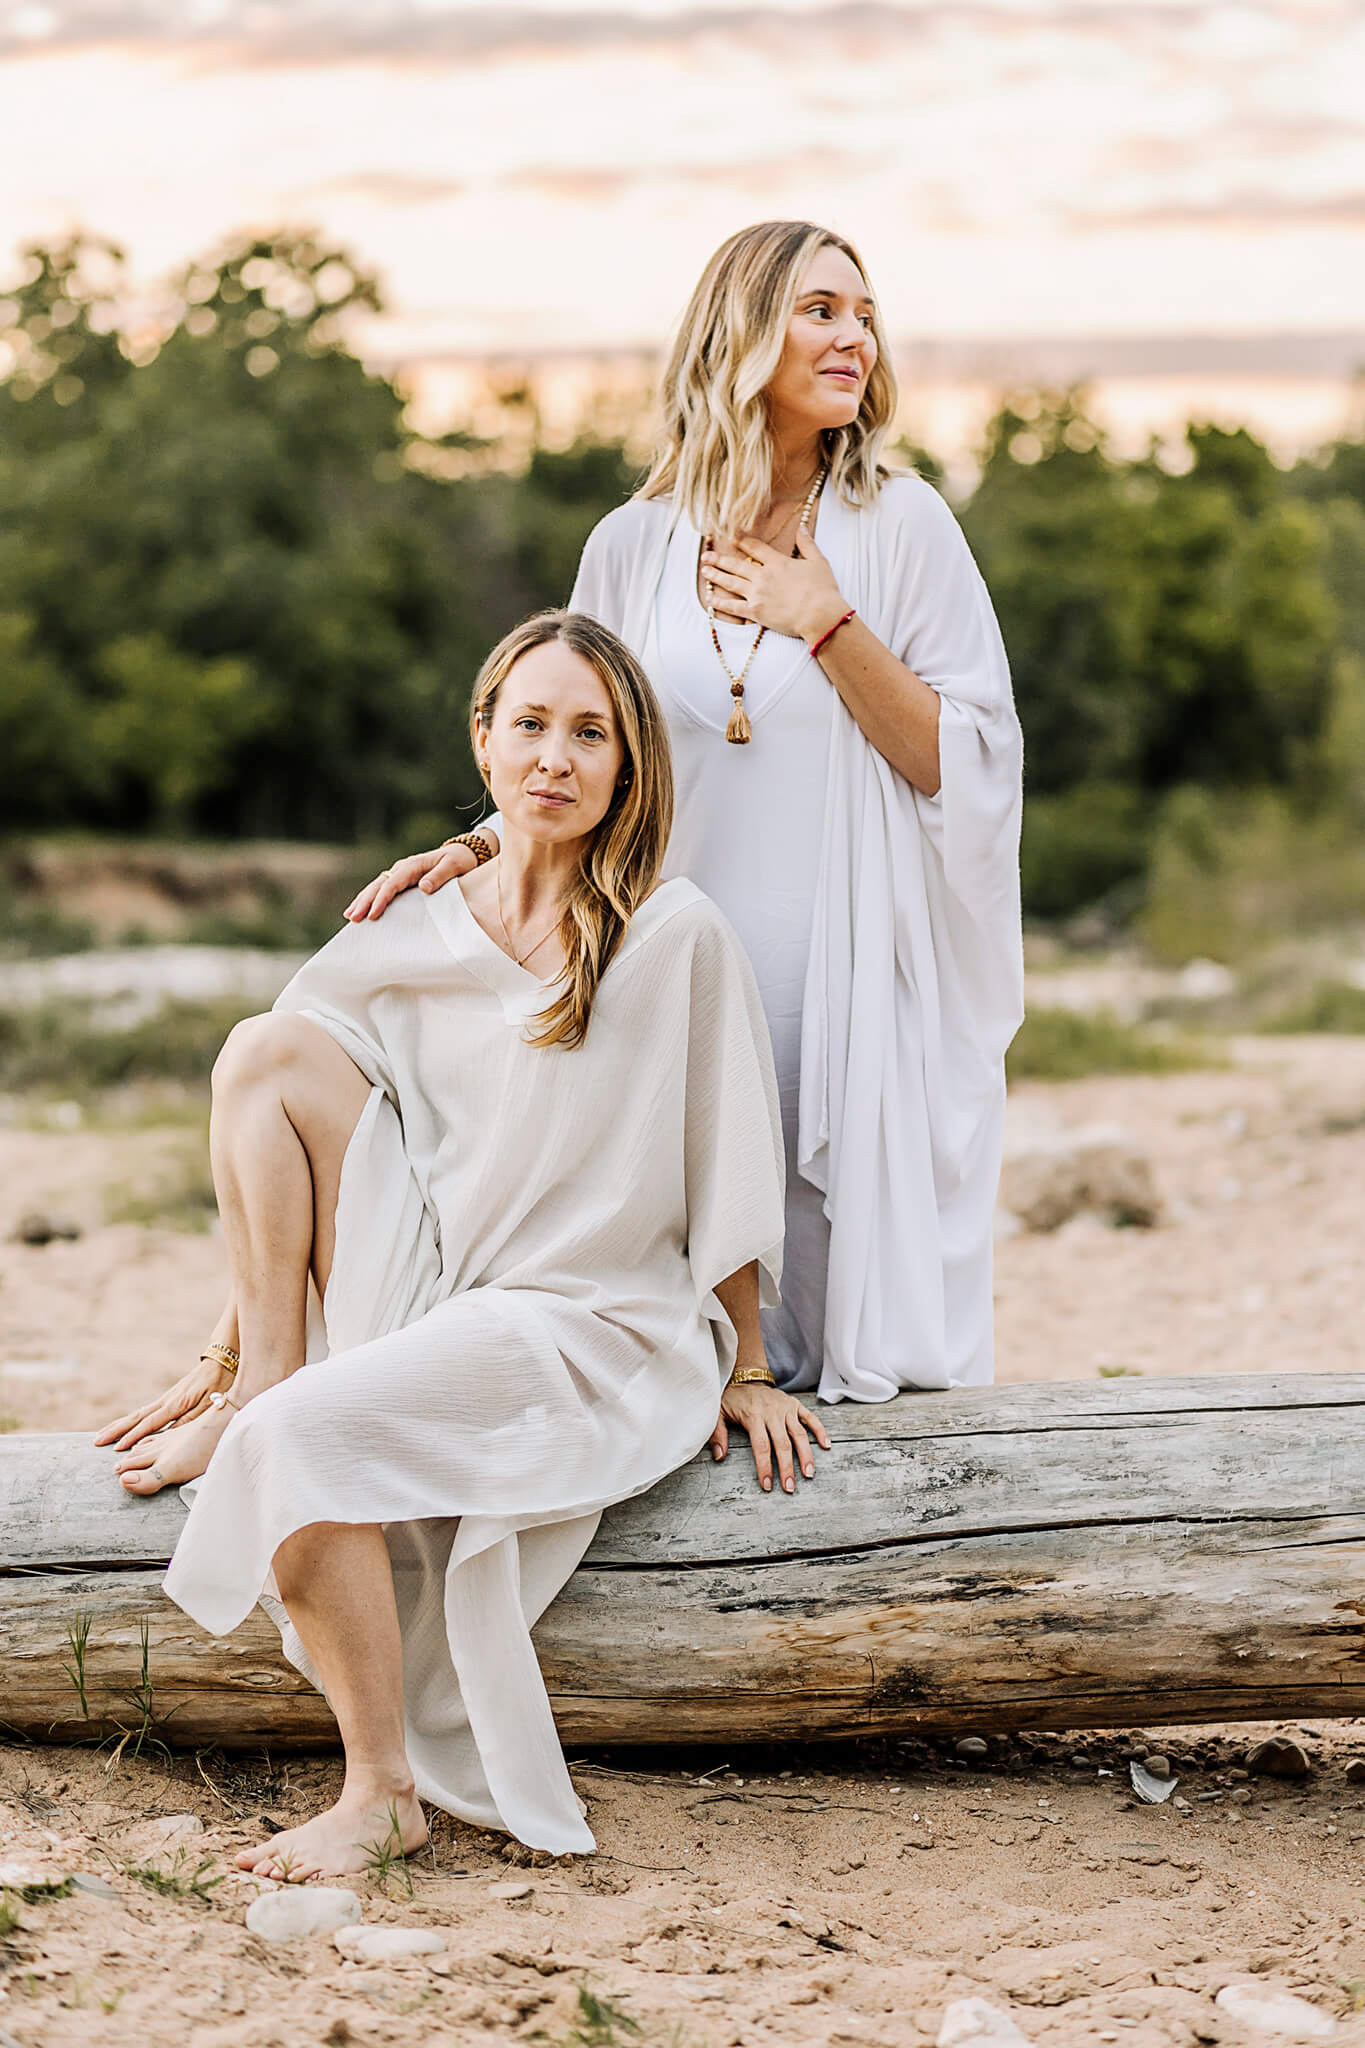 Yoga studio owners pose for a photo outdoors with beautiful sunset for a photoshoot